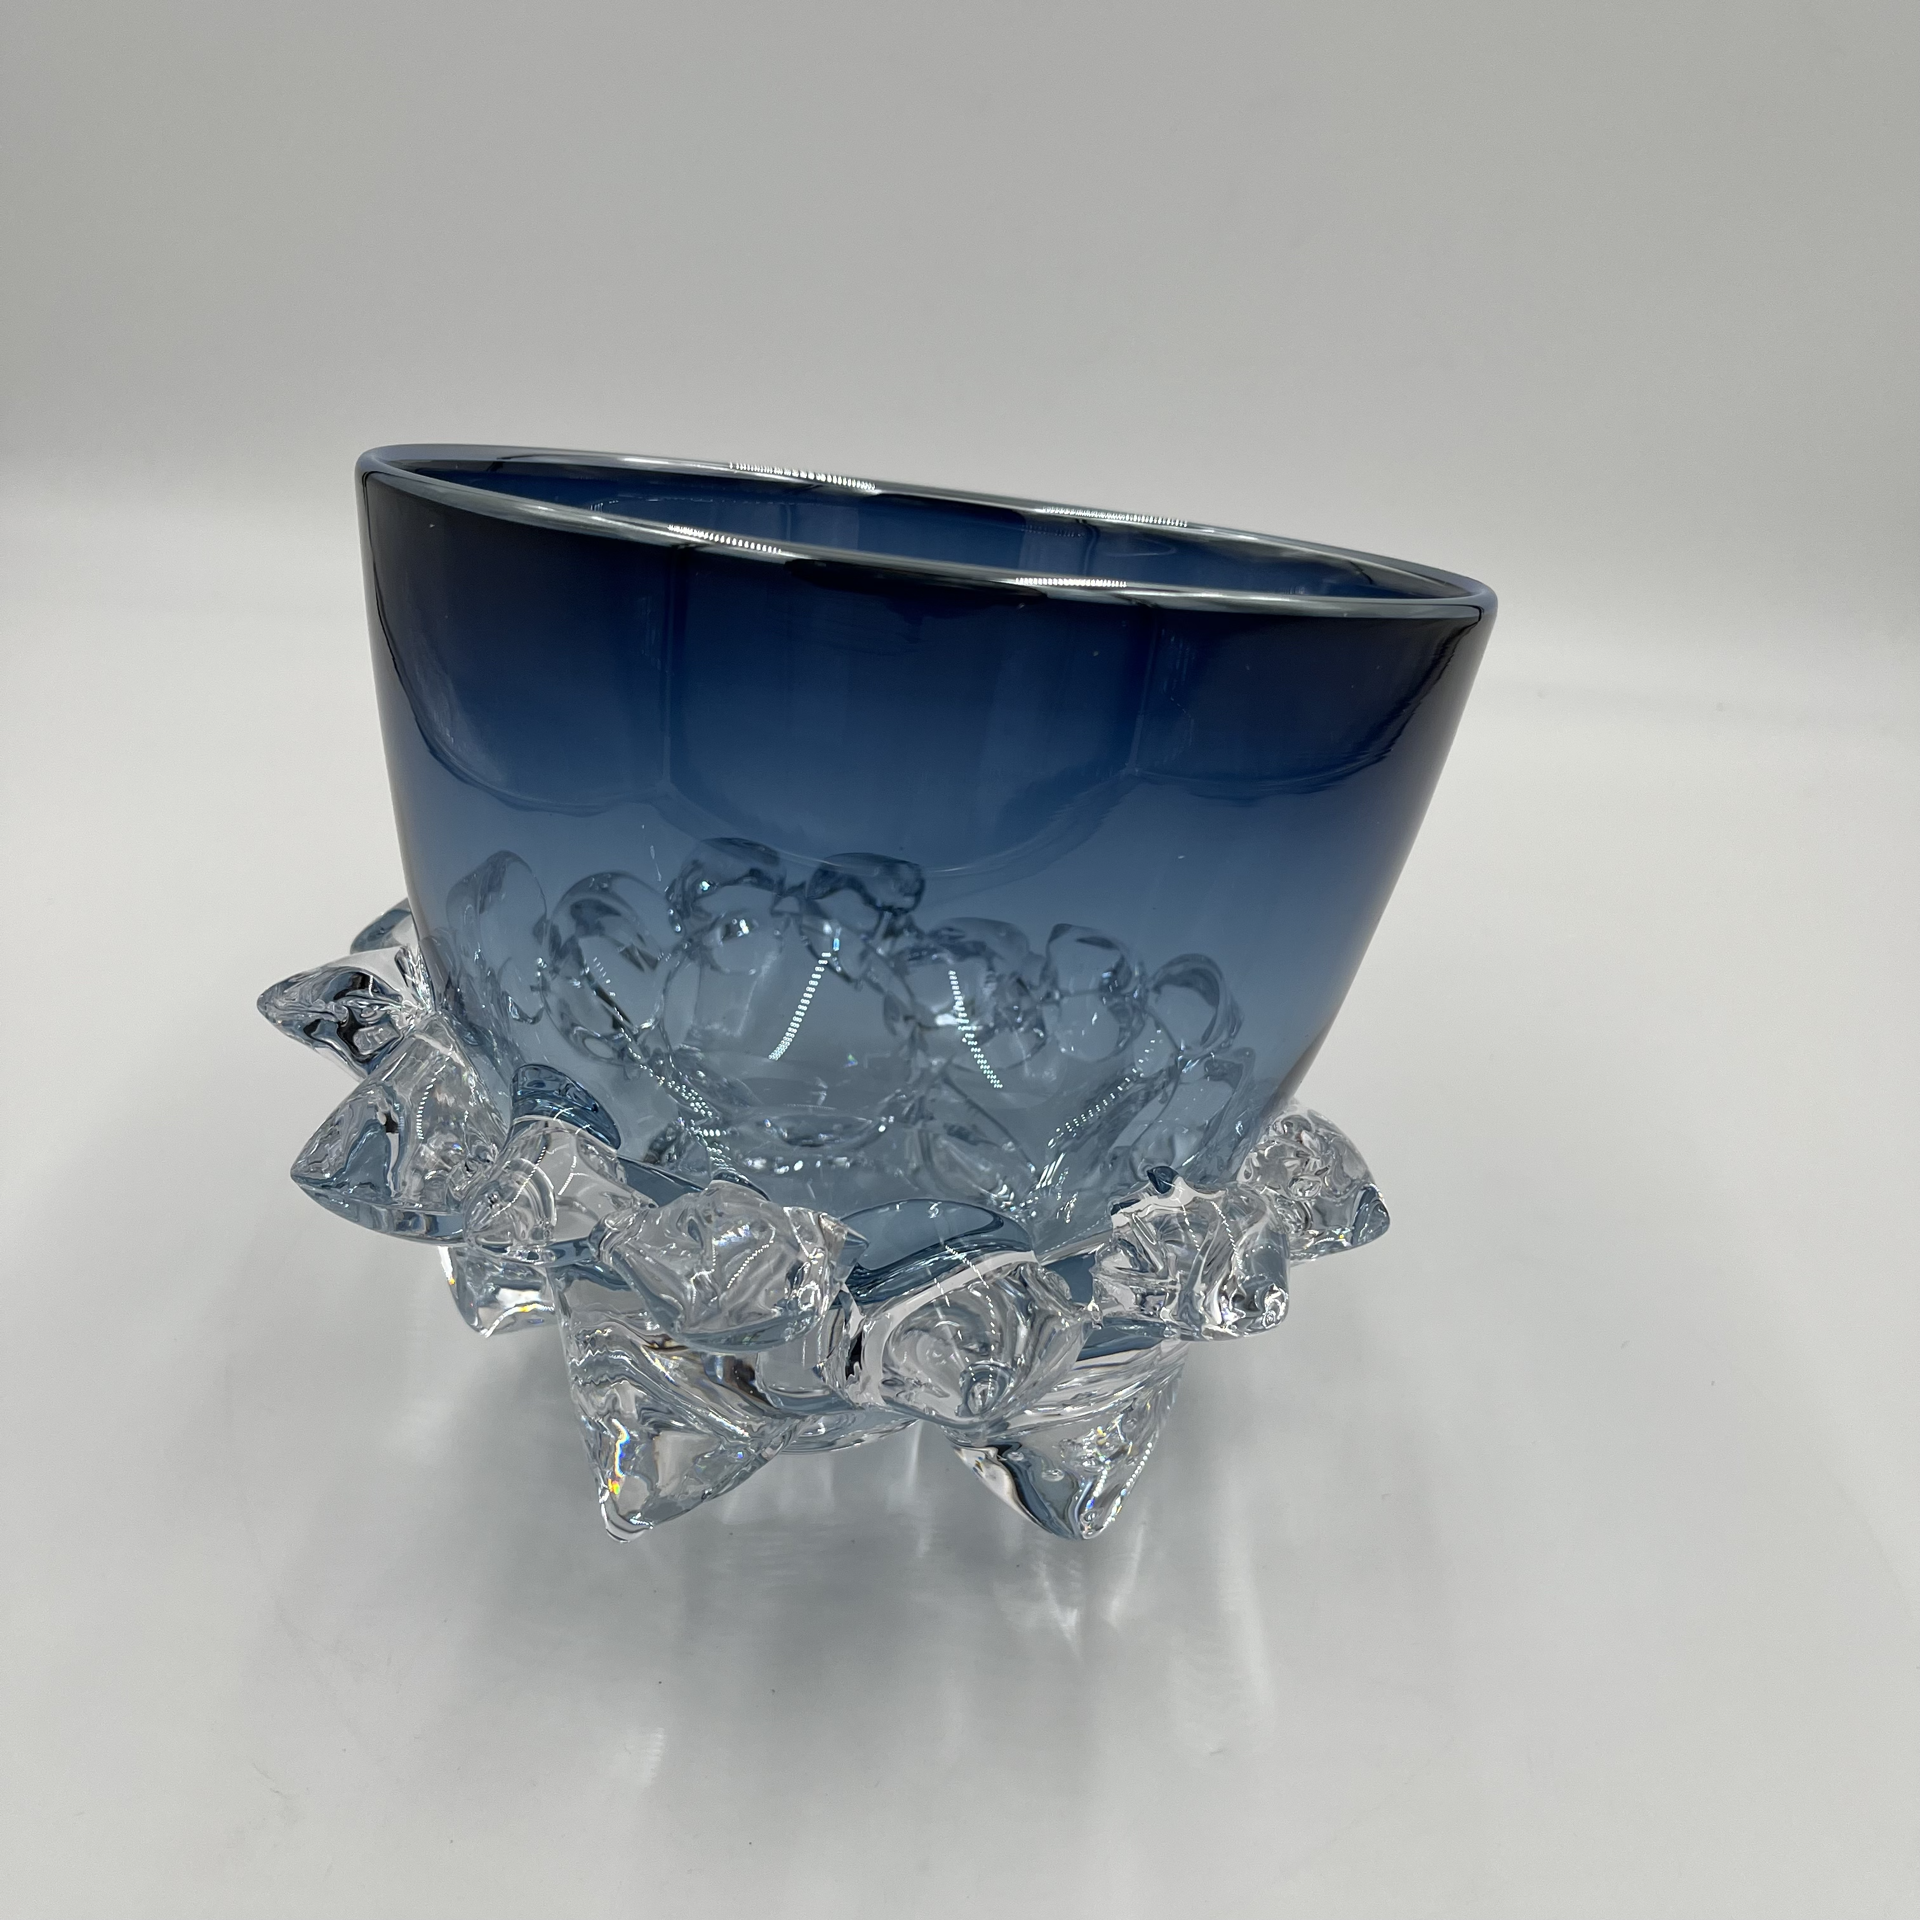 Midnight Blue Thorn Vessel by Andrew Madvin